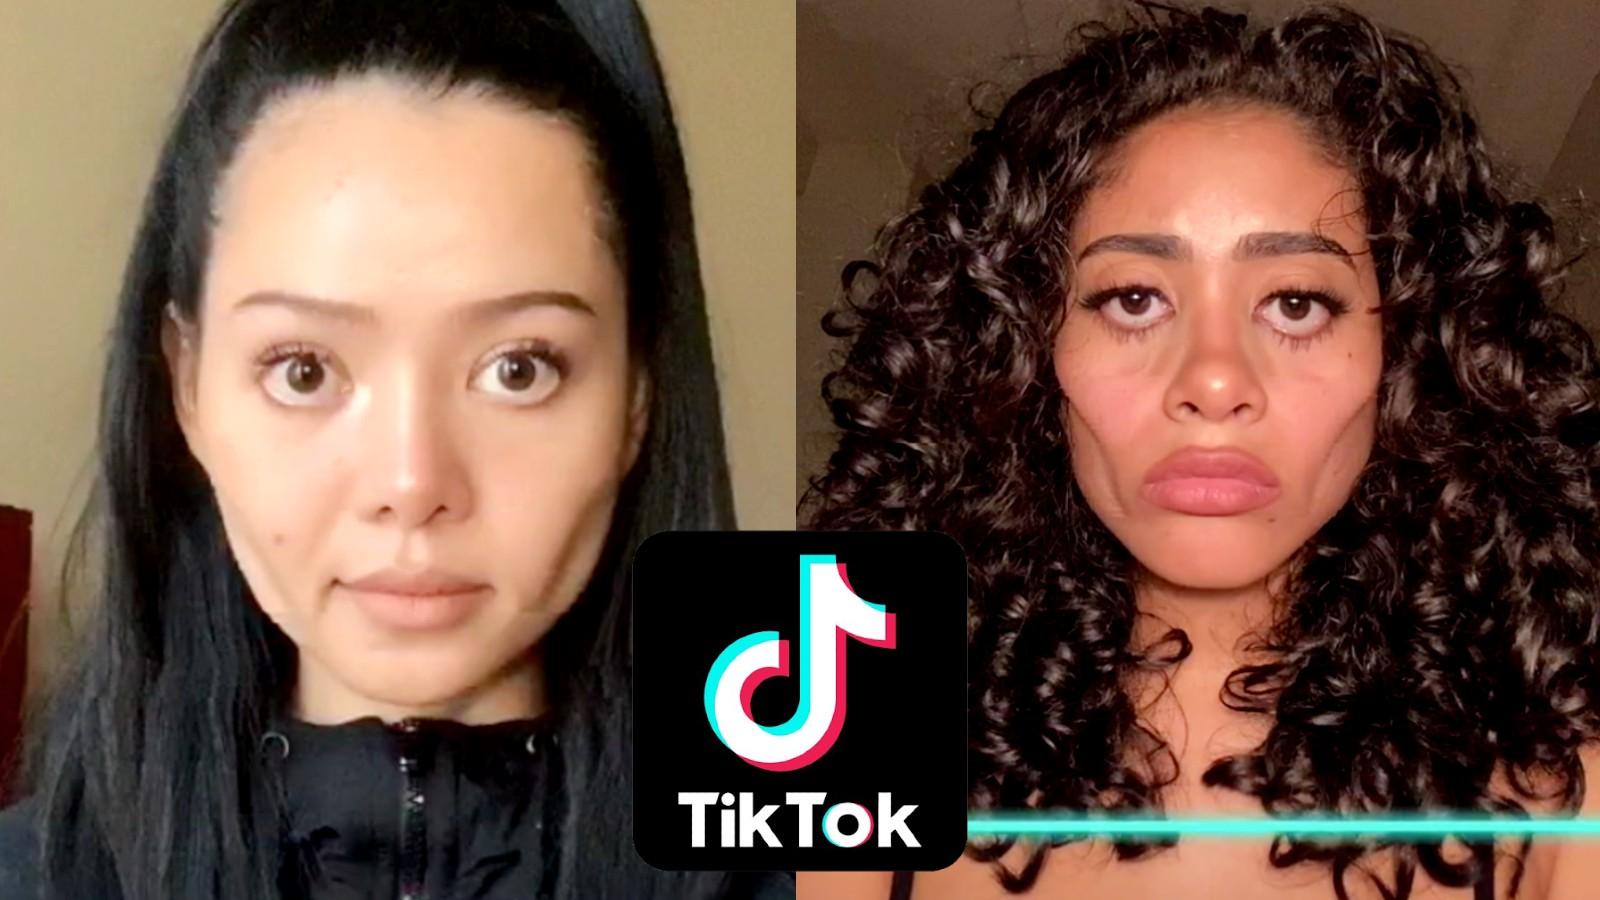 TikTok users including Bella Poarch make their faces look like Tim Burton characters